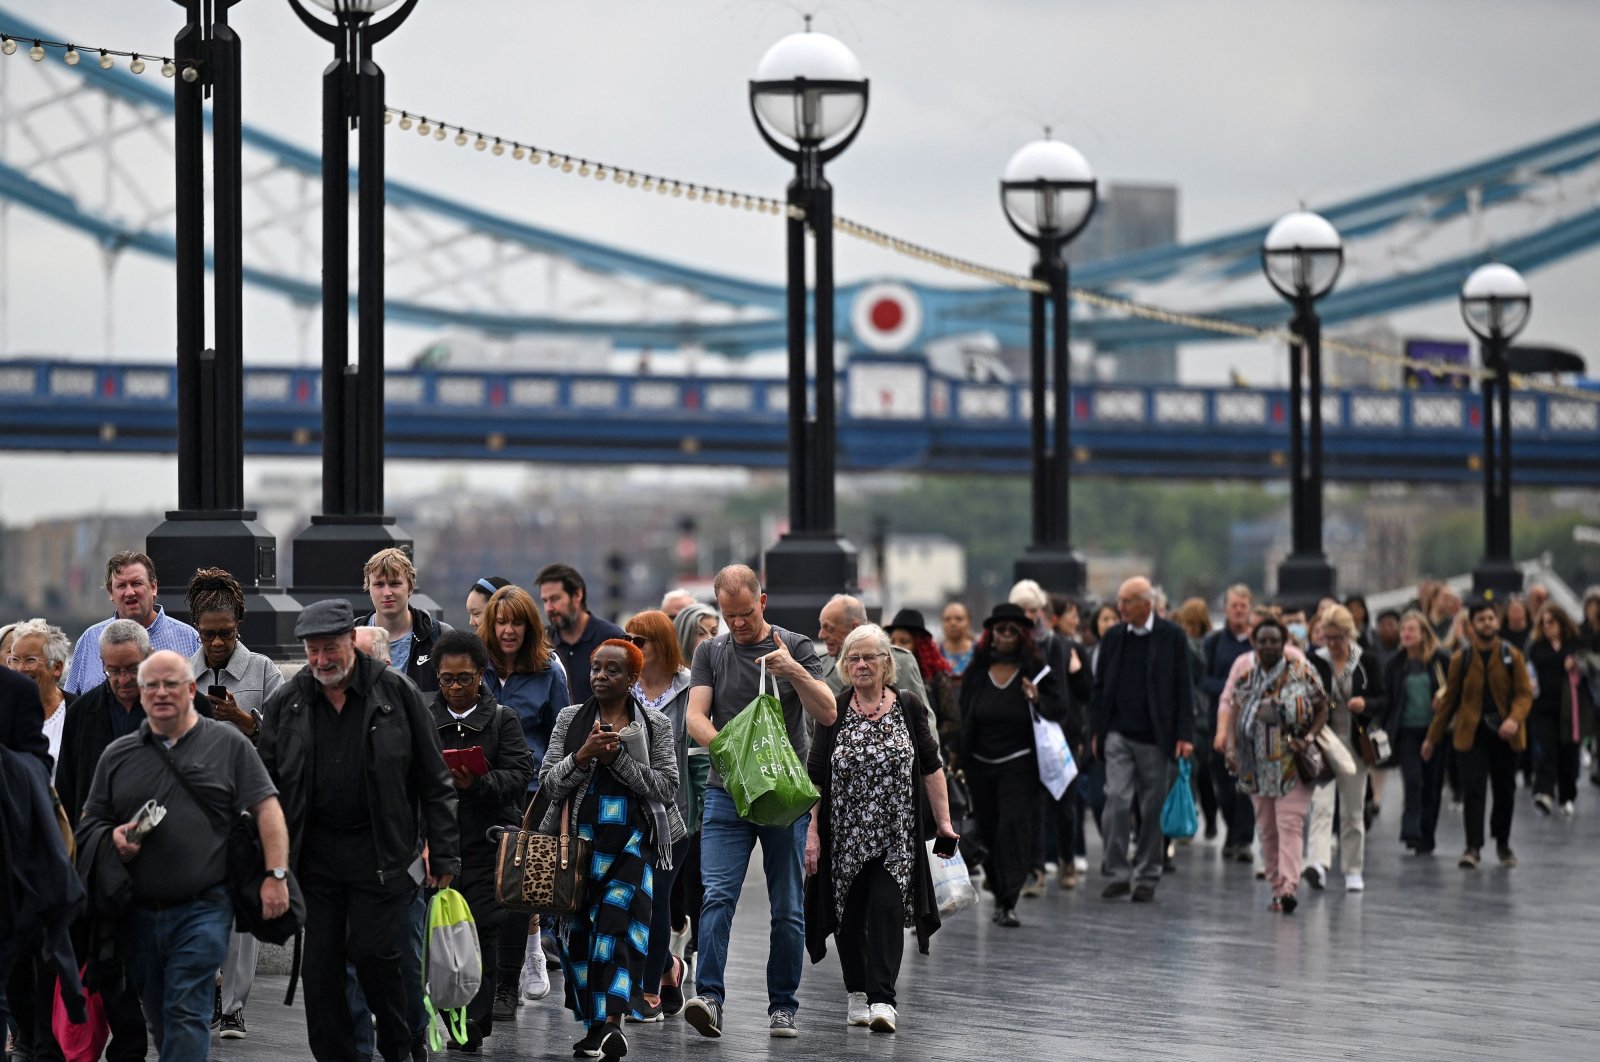 Members of the public stand in the queue on the South Bank of the River Thames, near Tower Bridge, as they wait in line to pay their respects to the late Queen Elizabeth II, in London, U.K. Sept. 15, 2022. (AFP Photo)